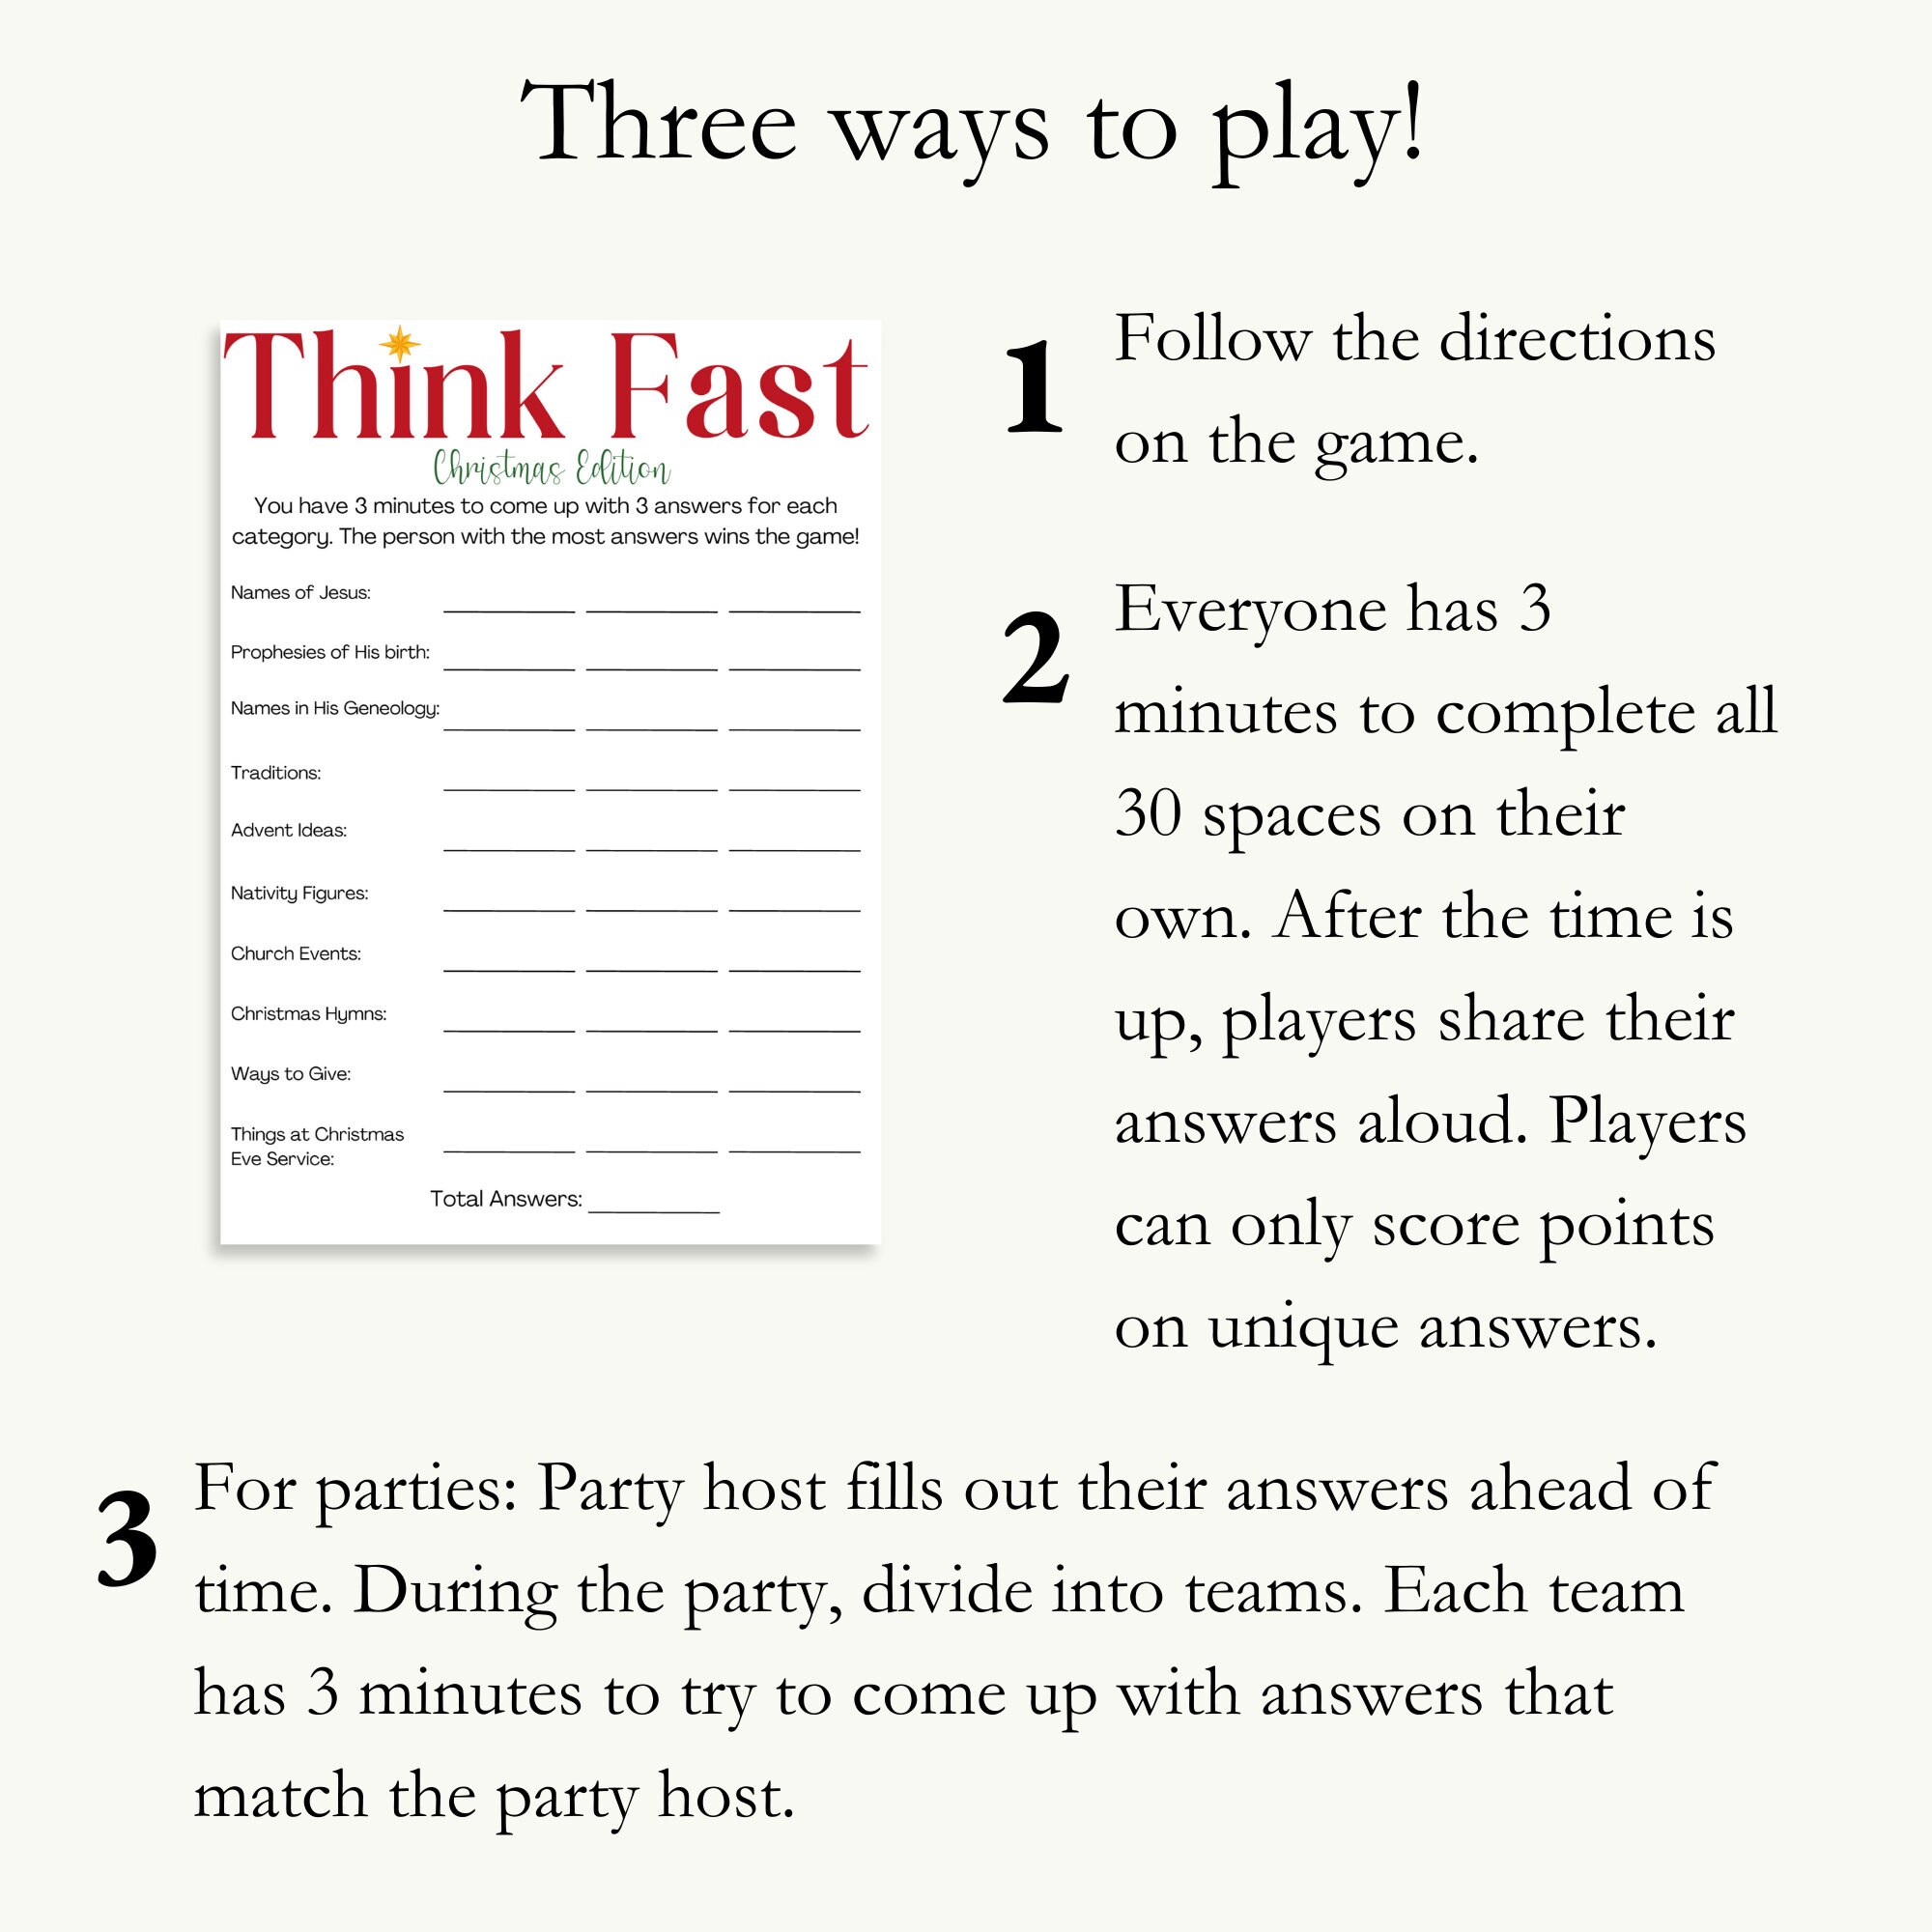 Christmas Fast Answers - The Fun Quick Thinking Family Party Game! – Print  GoGo